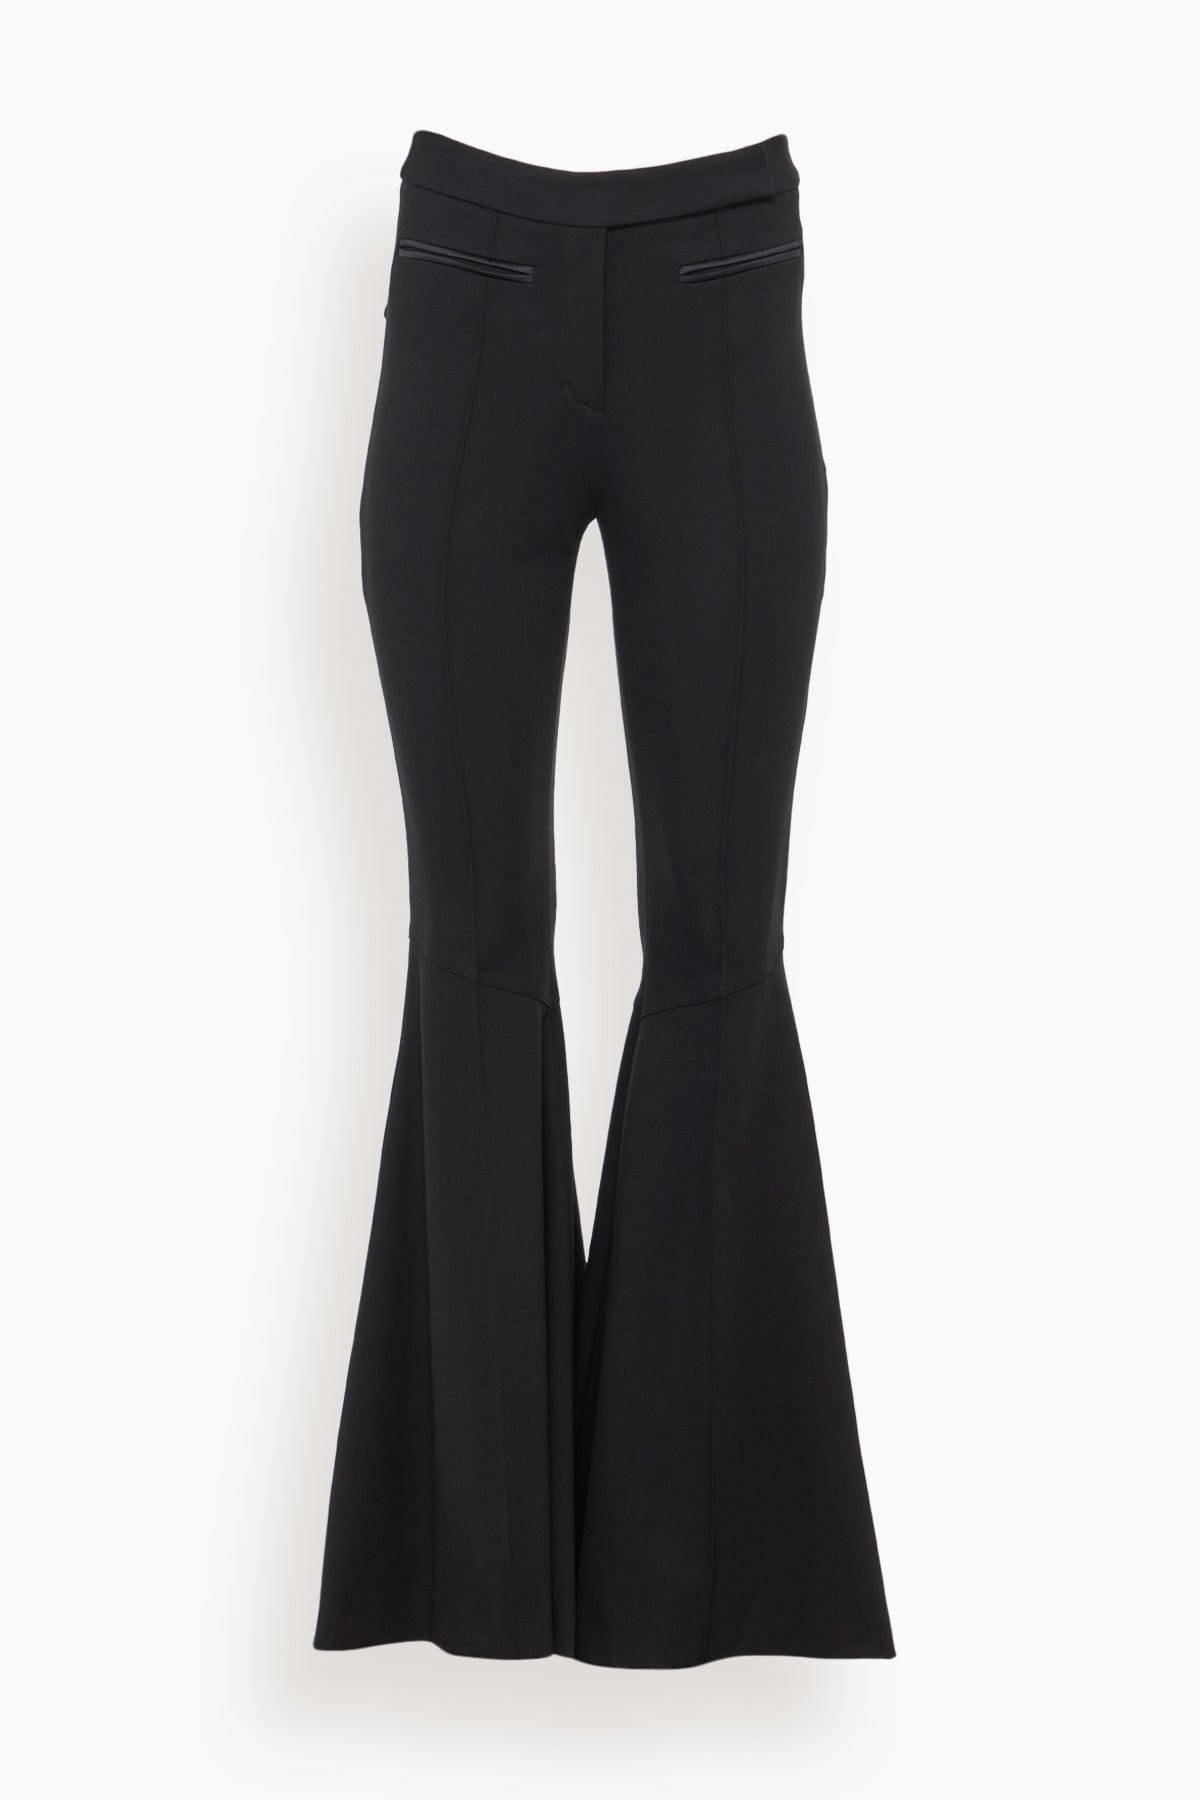 Emotional Essence Flared Leg Pant in Pure Black - 1